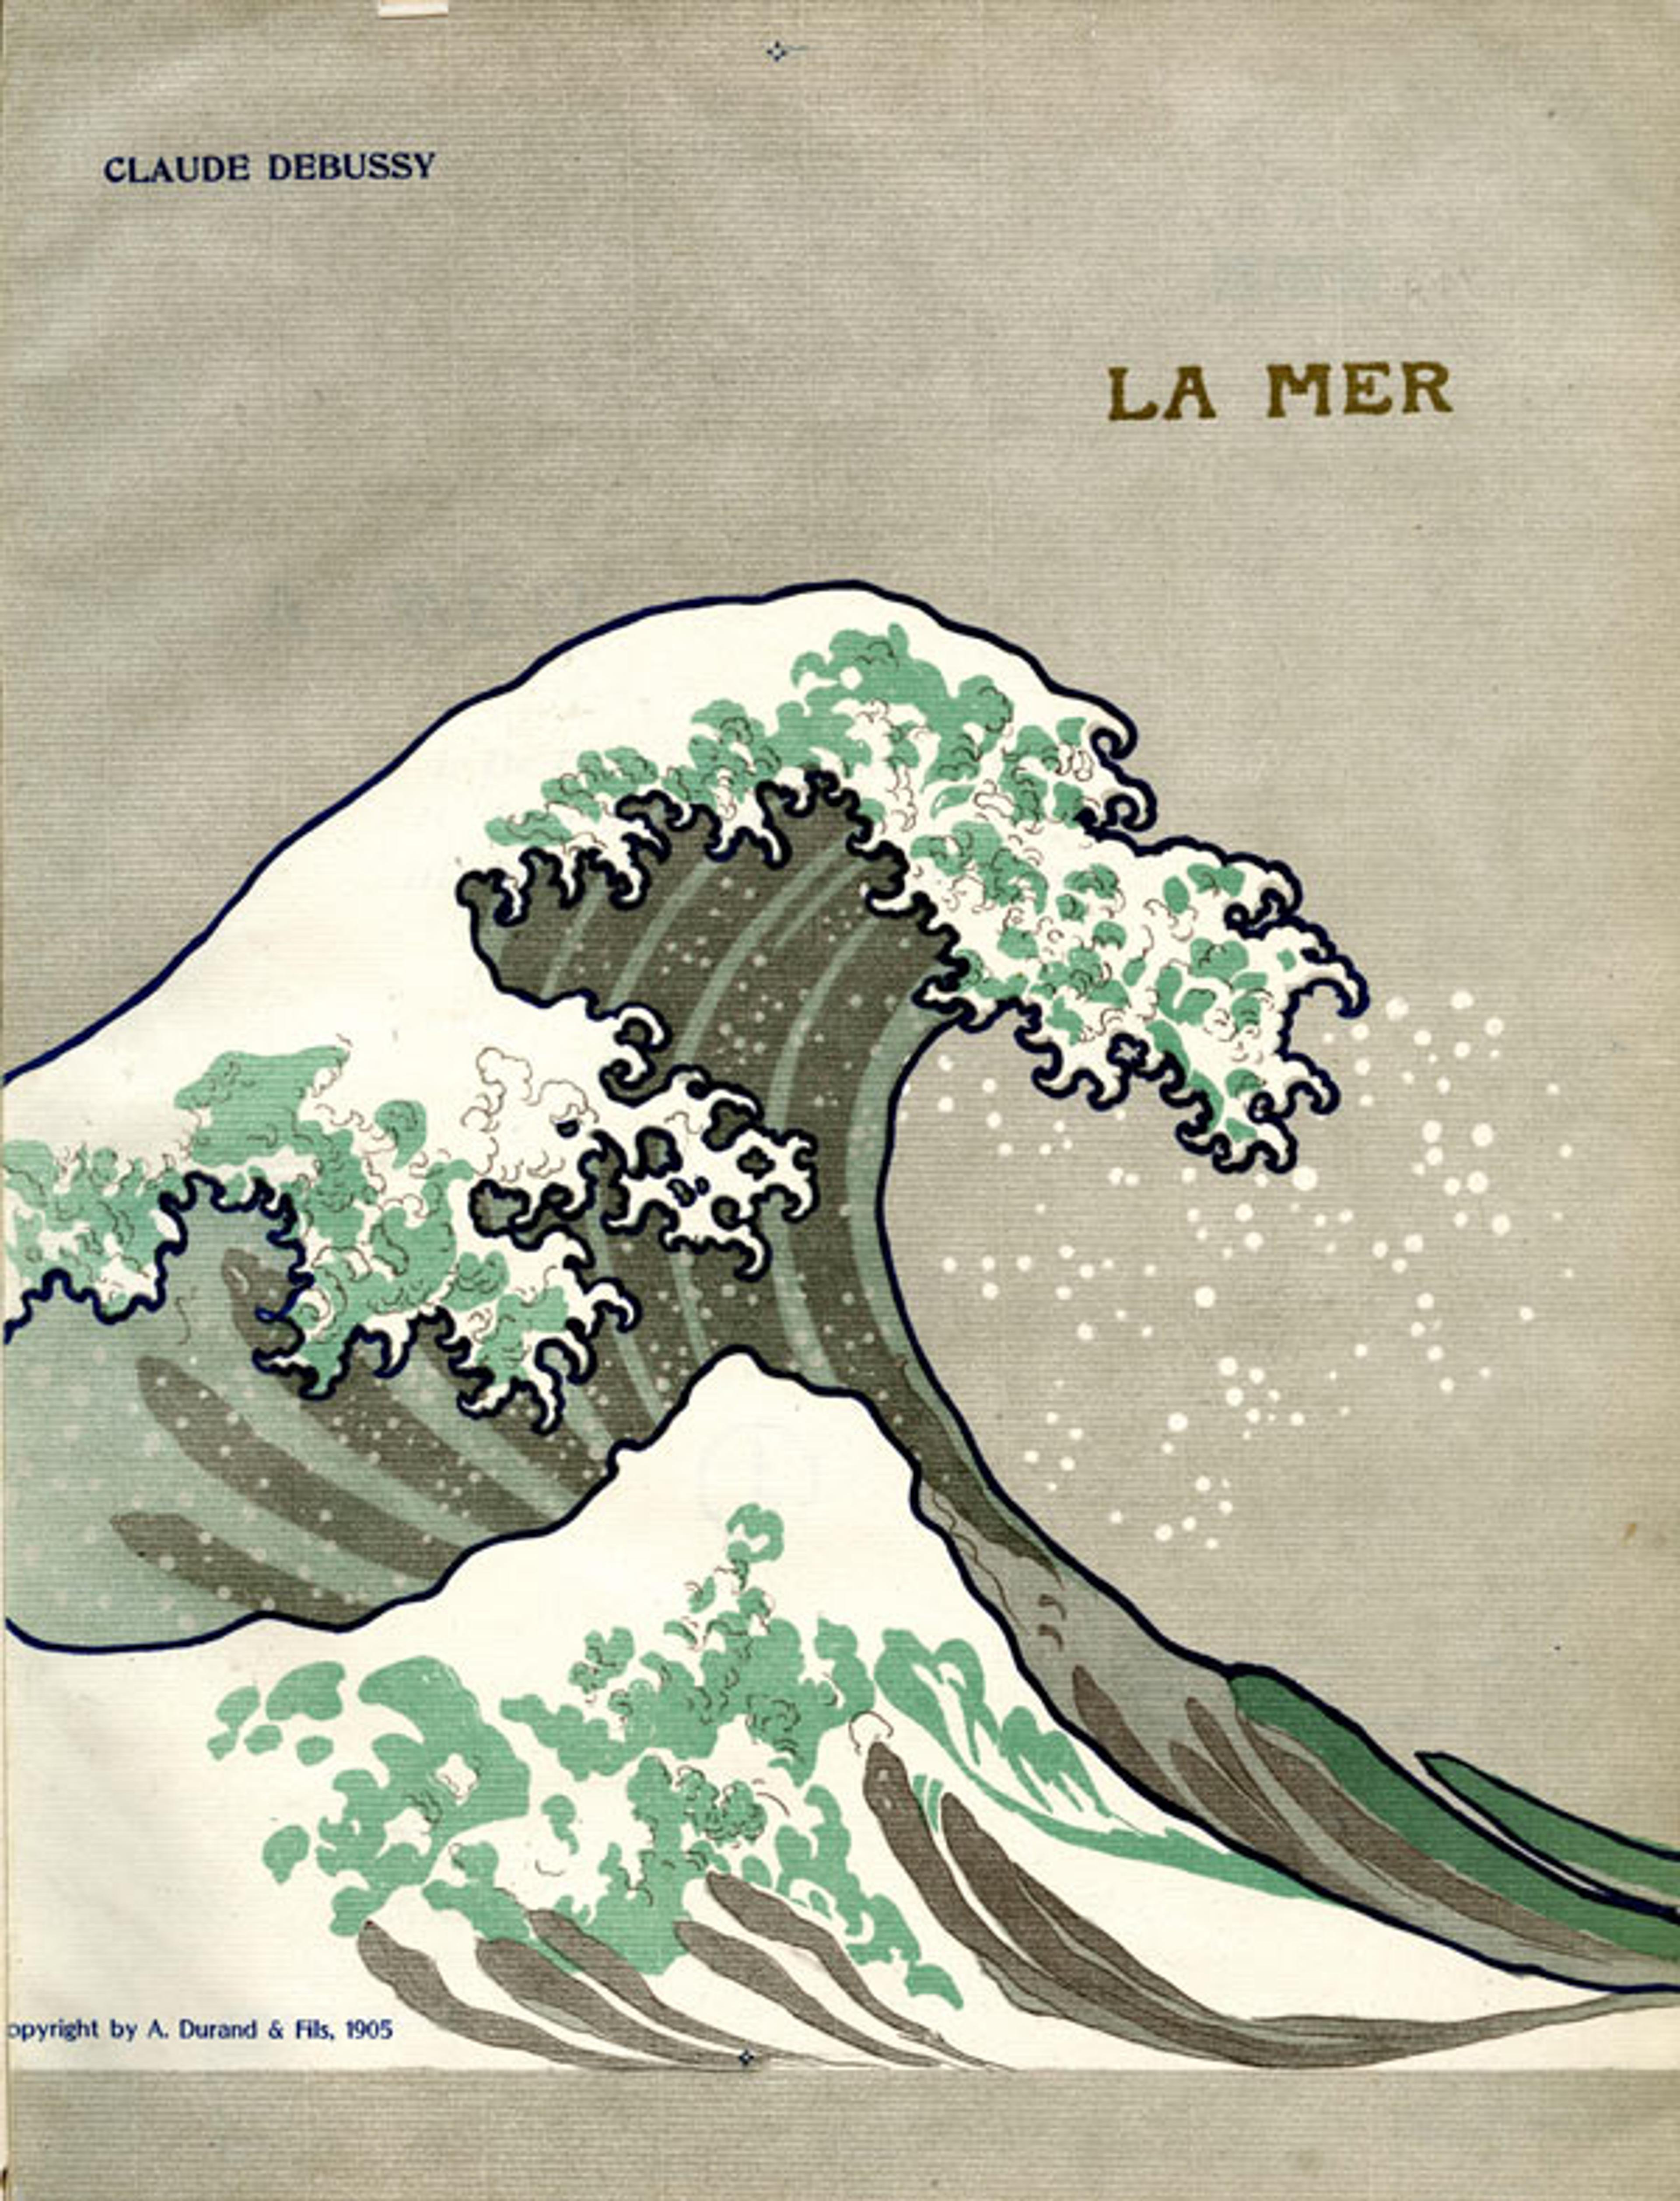 Cover of the first edition of Debussy's La Mer, published by Durand, 1905